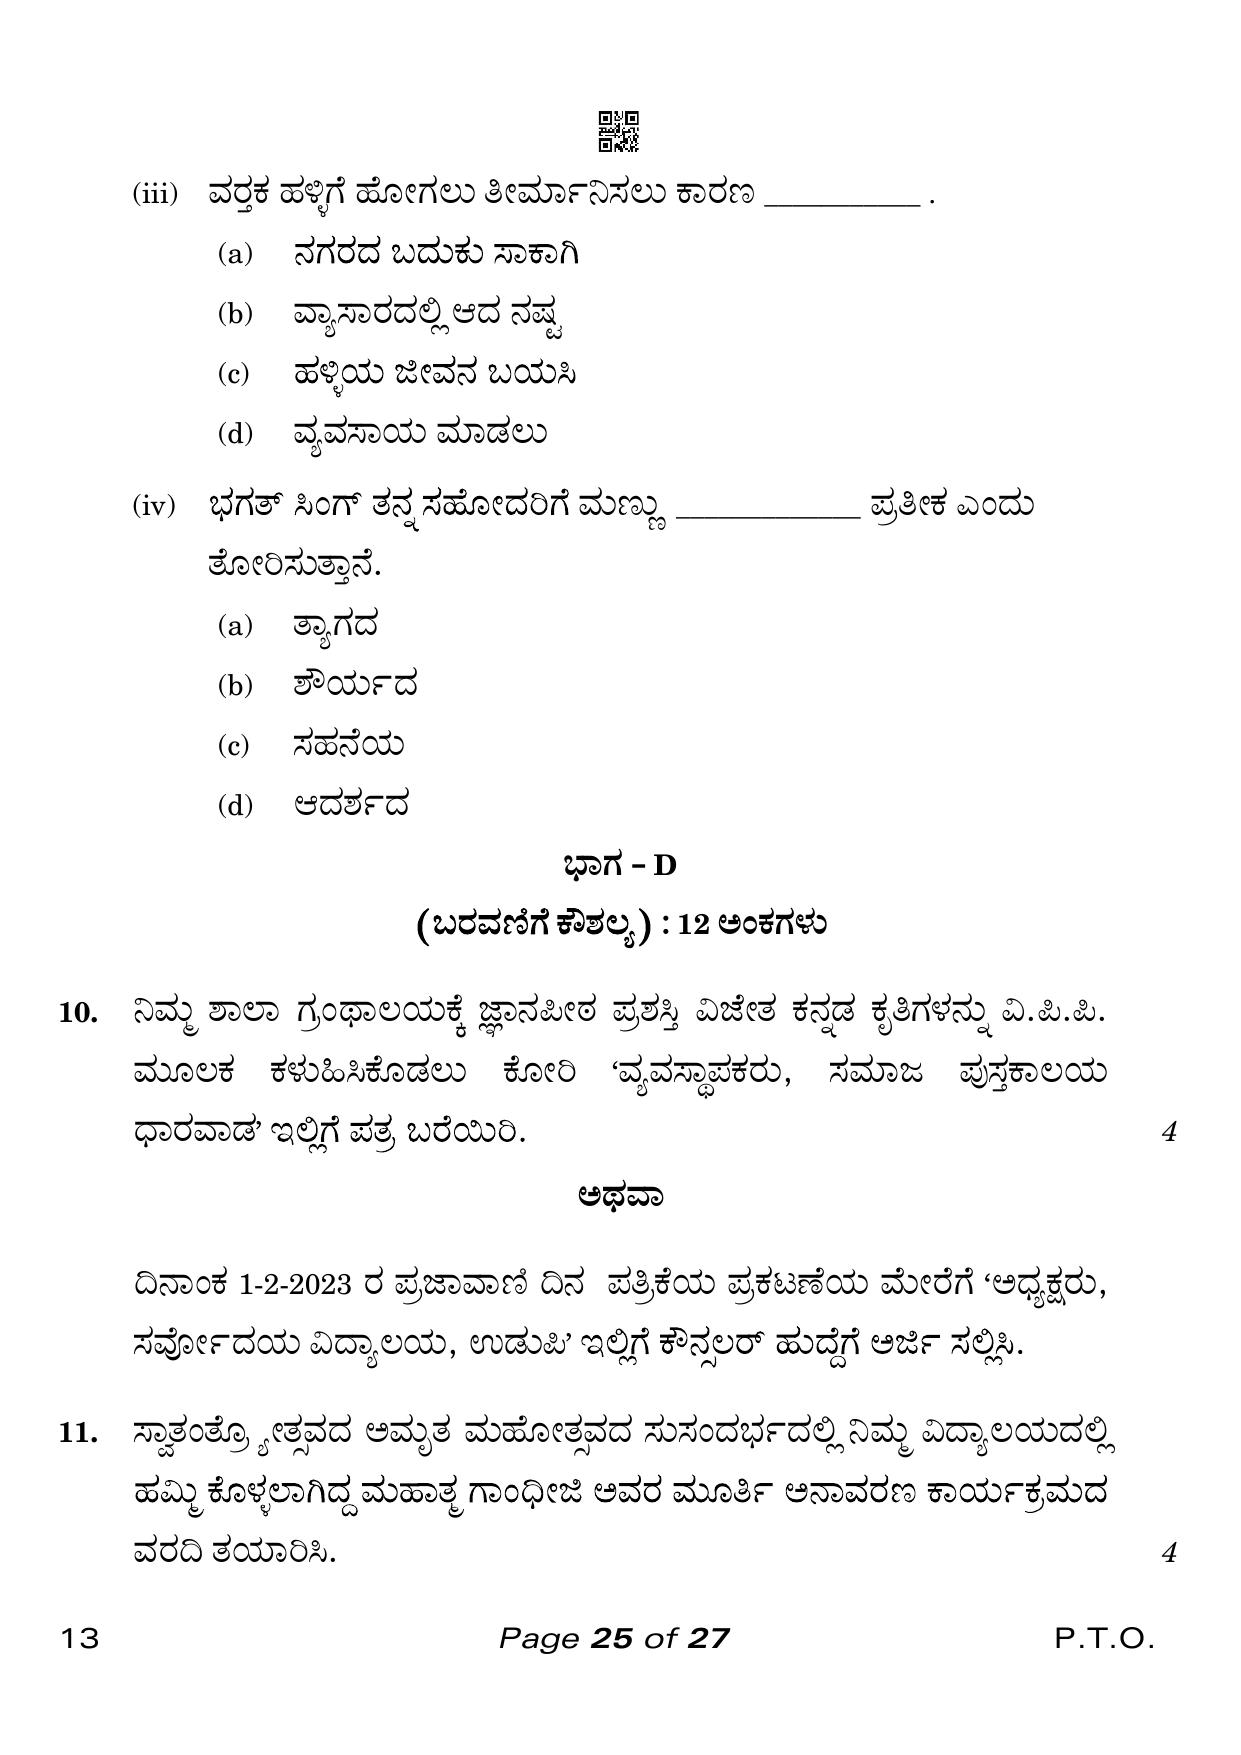 CBSE Class 10 Kannada (Compartment) 2023 Question Paper - Page 25